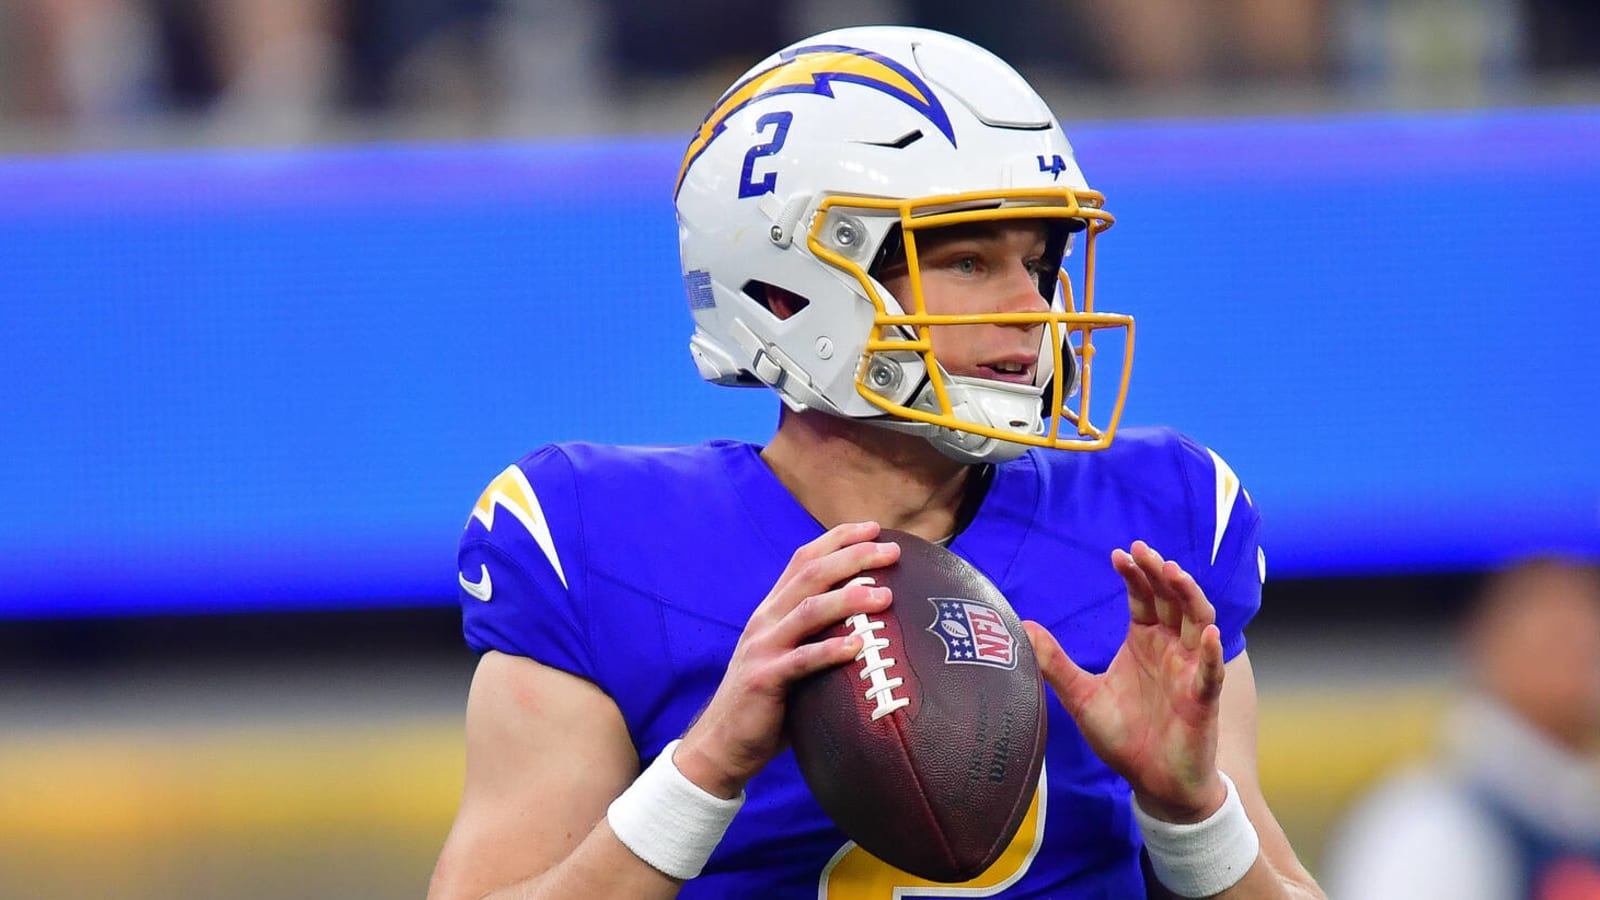 Pro Picks: Easton Stick will lead Chargers to an upset road win over  Raiders in first NFL start – KGET 17